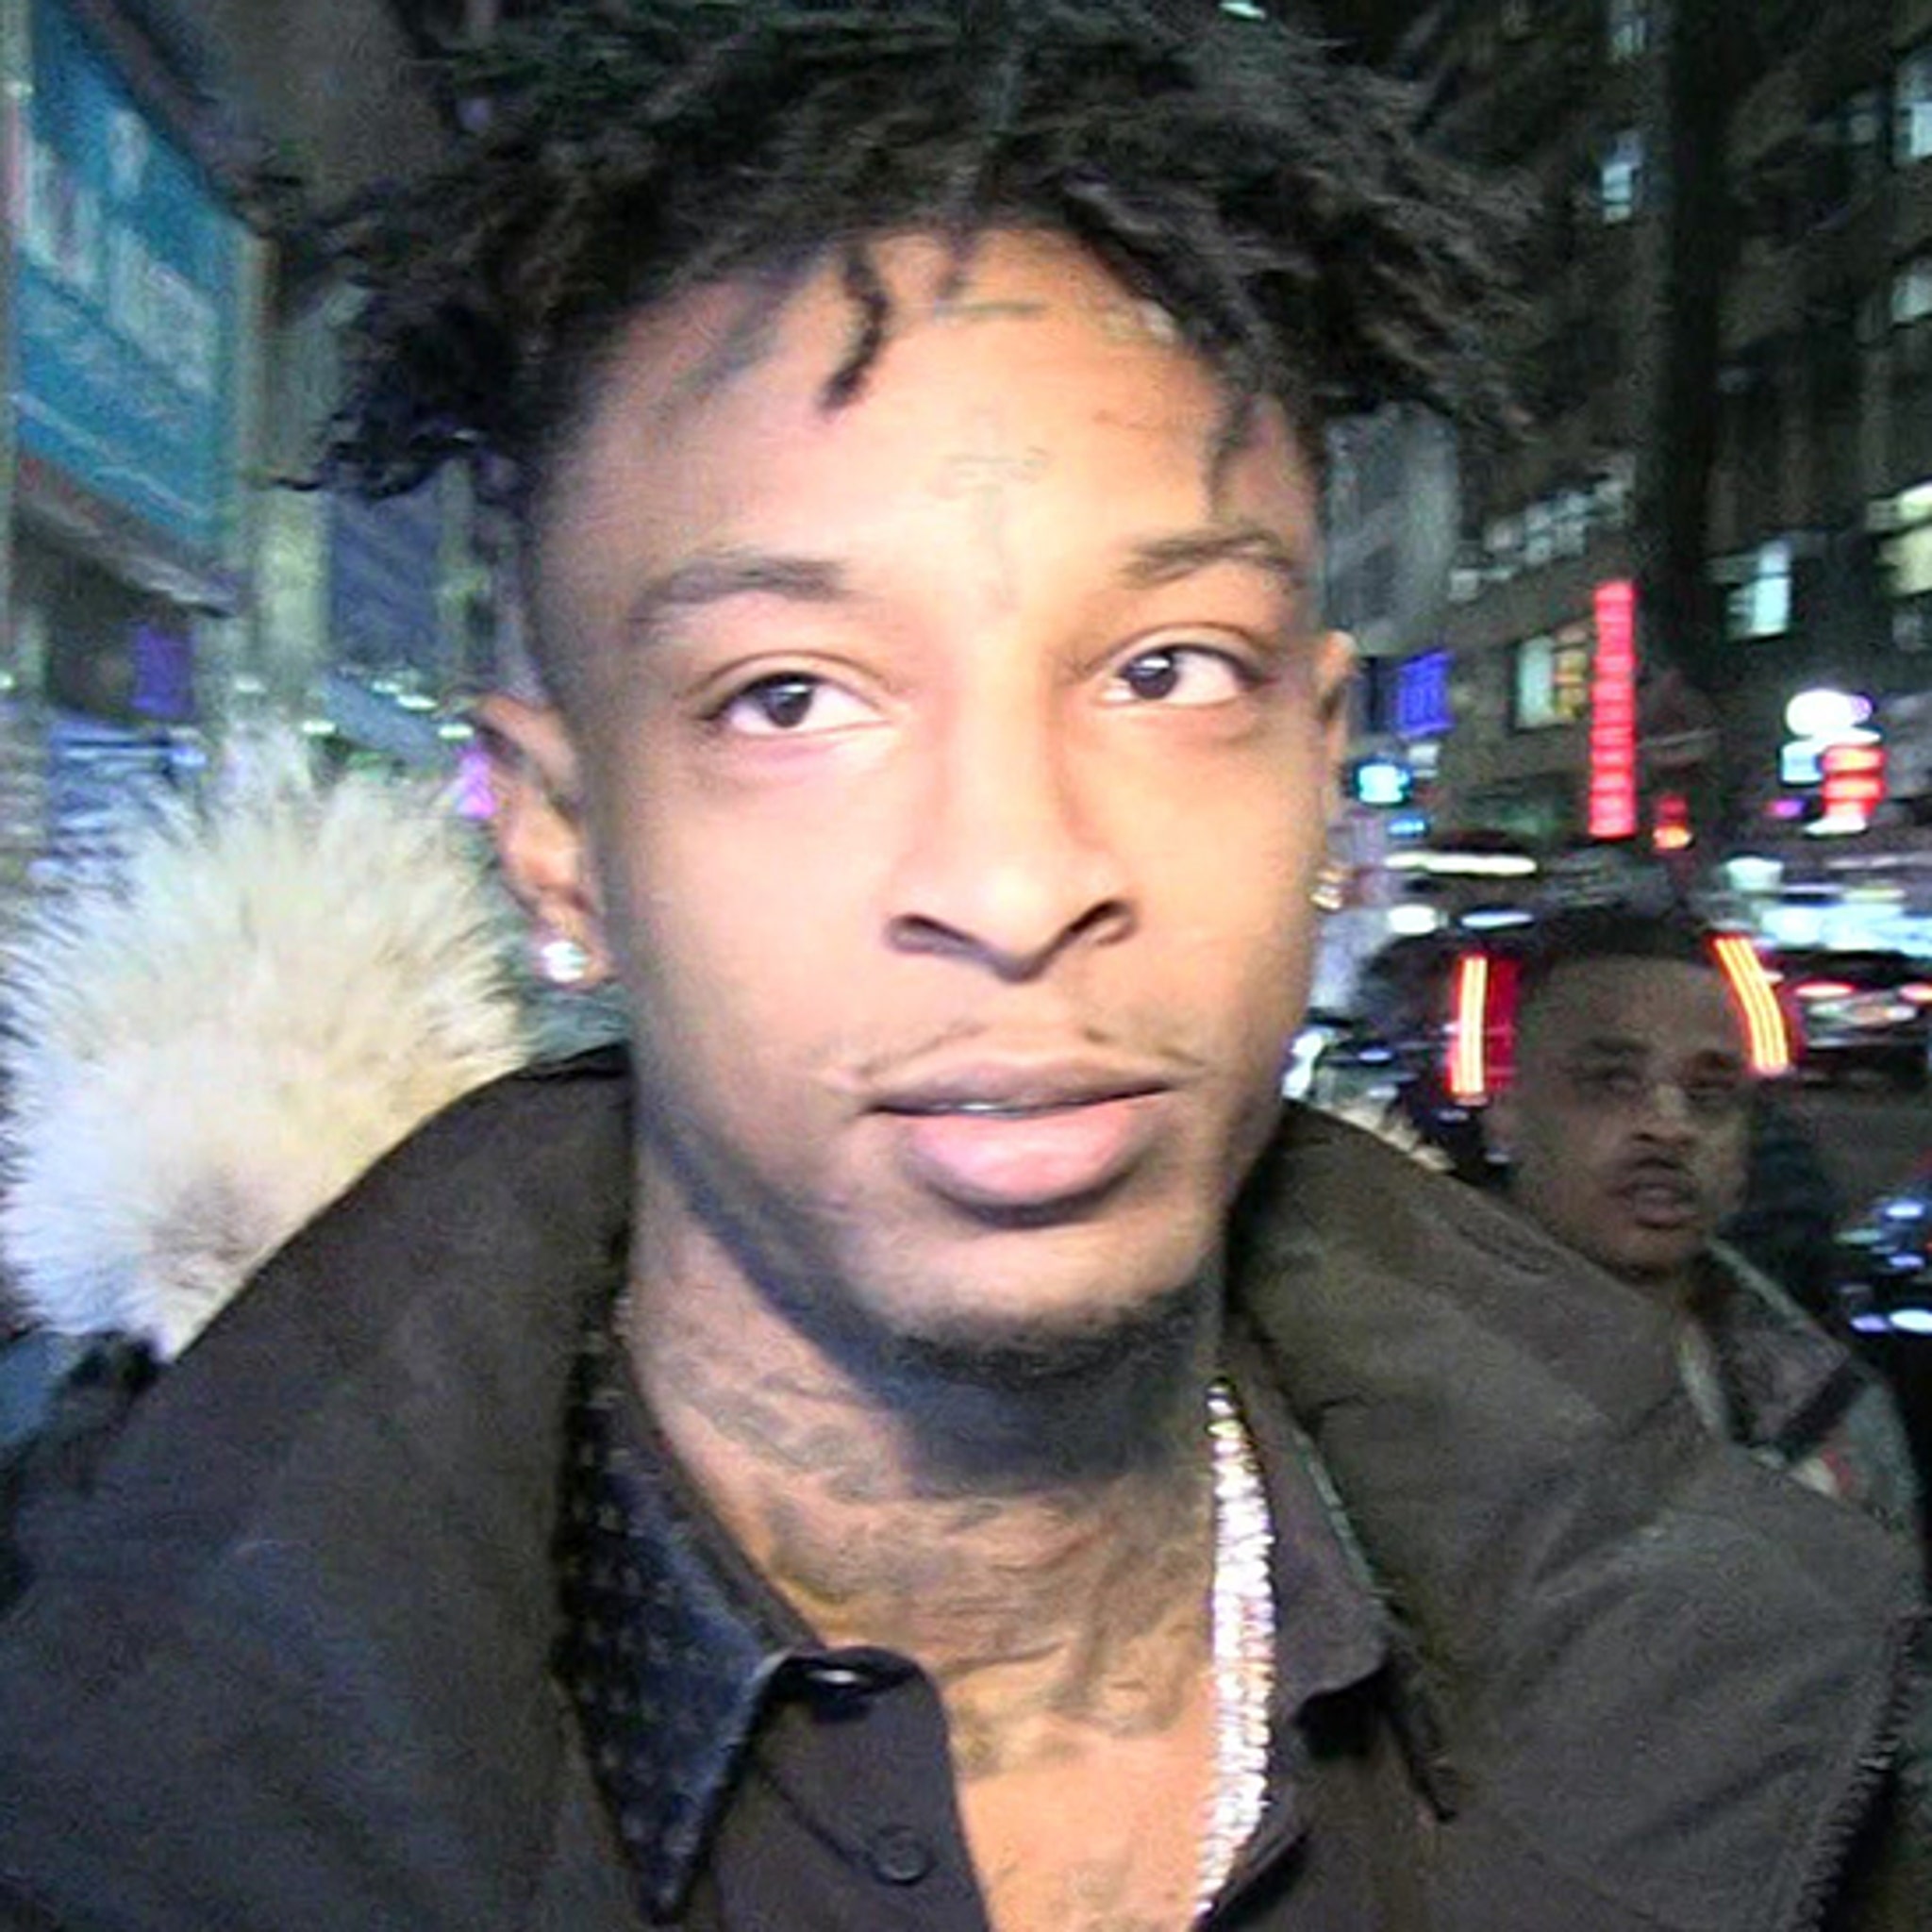 21 Savage posting a selfie for his social media fans.